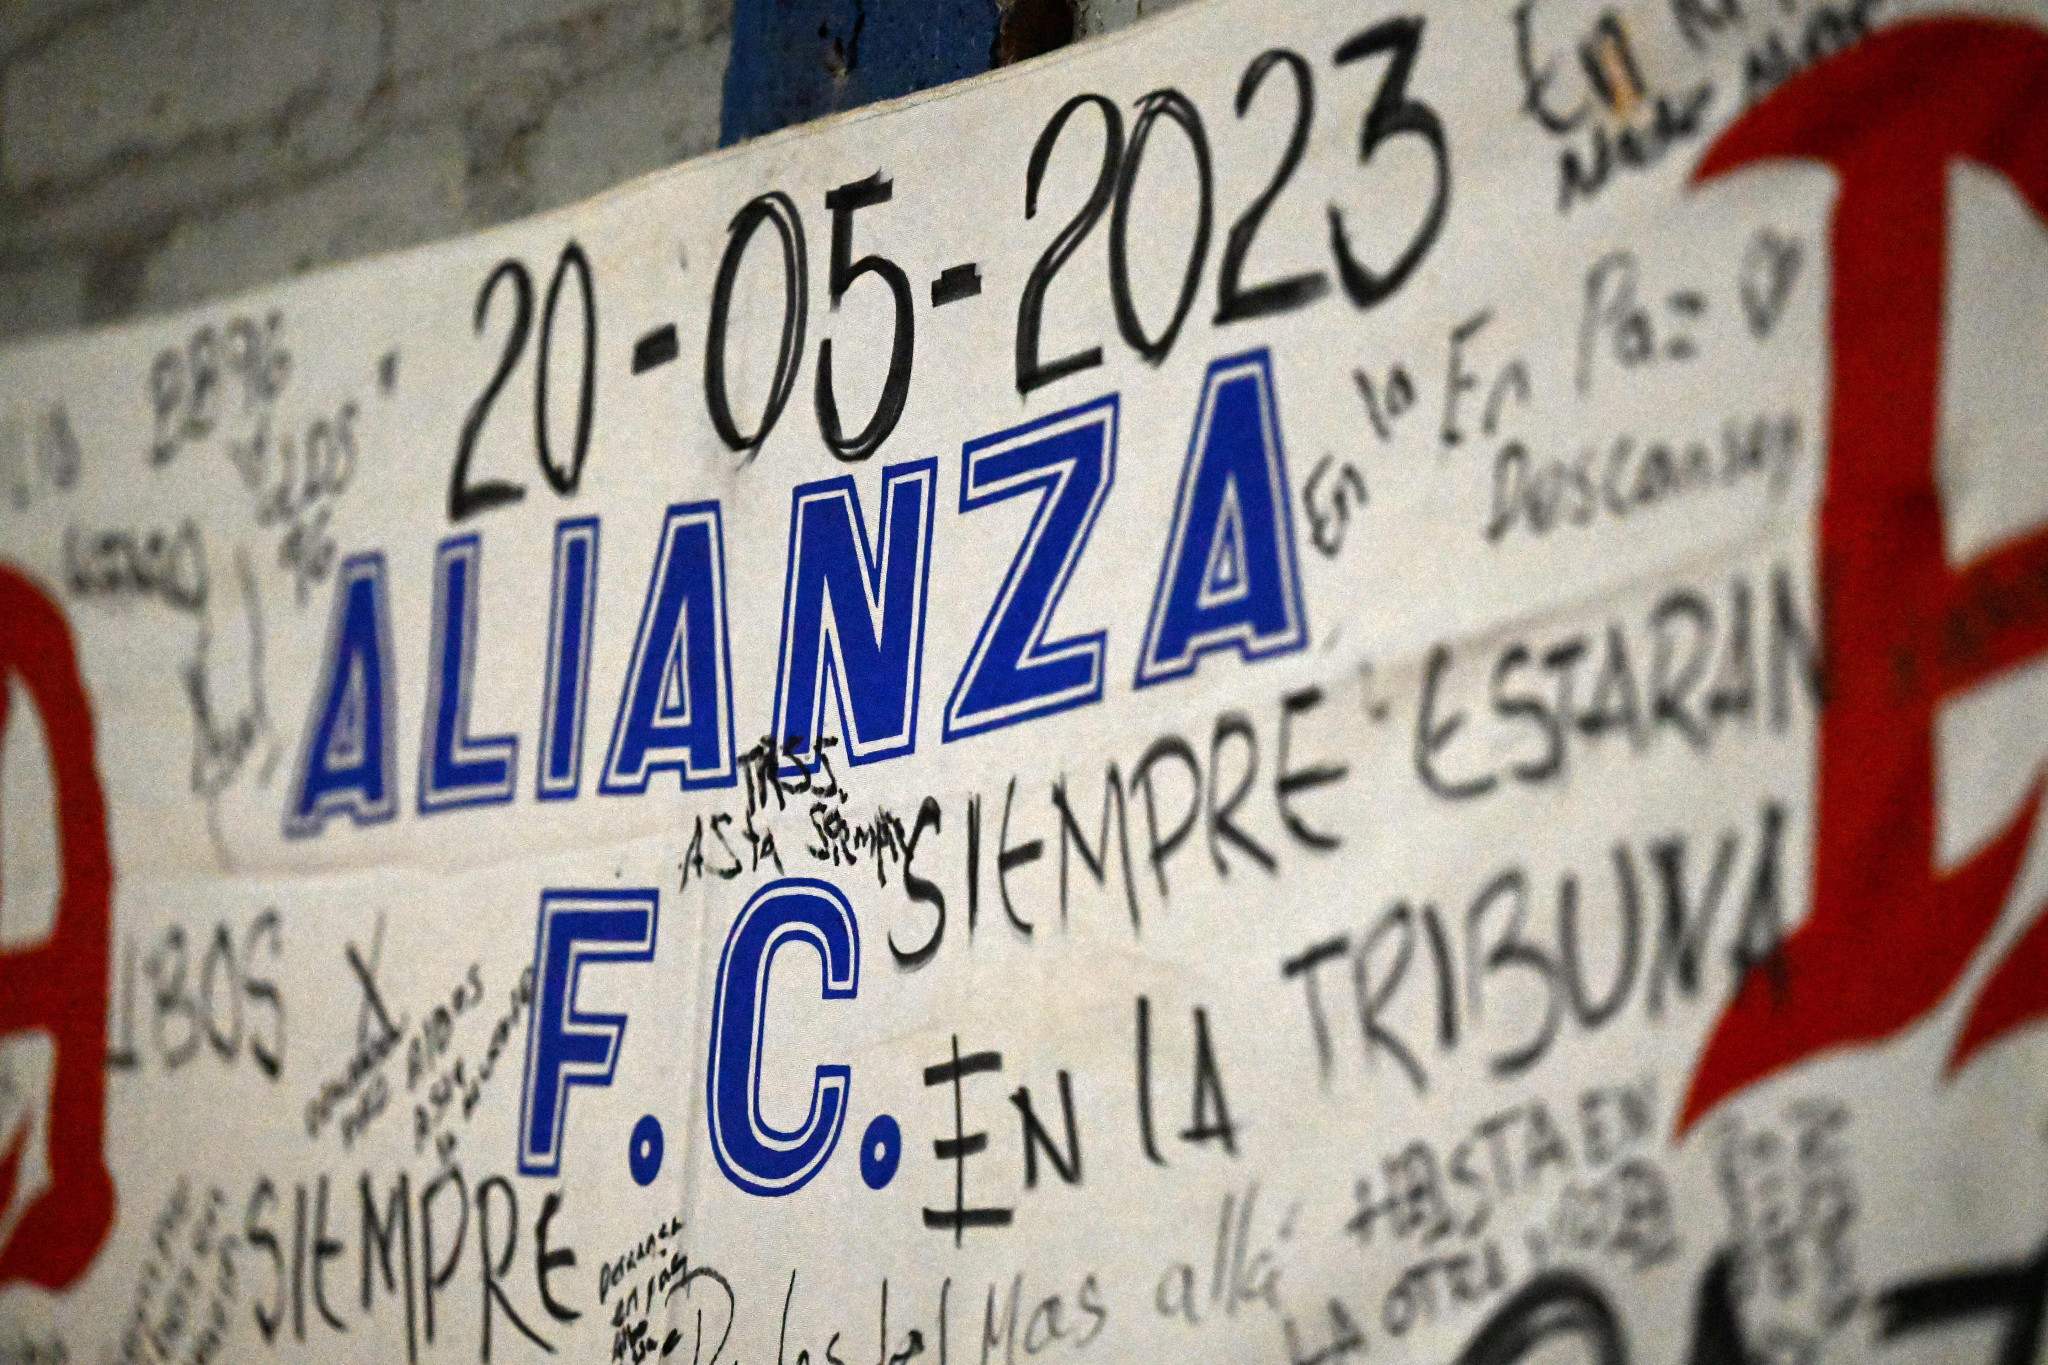 Allianza FC have been forced to play matches behind closed doors for 12 months following the incident, which has led to 12 deaths ©Getty Images